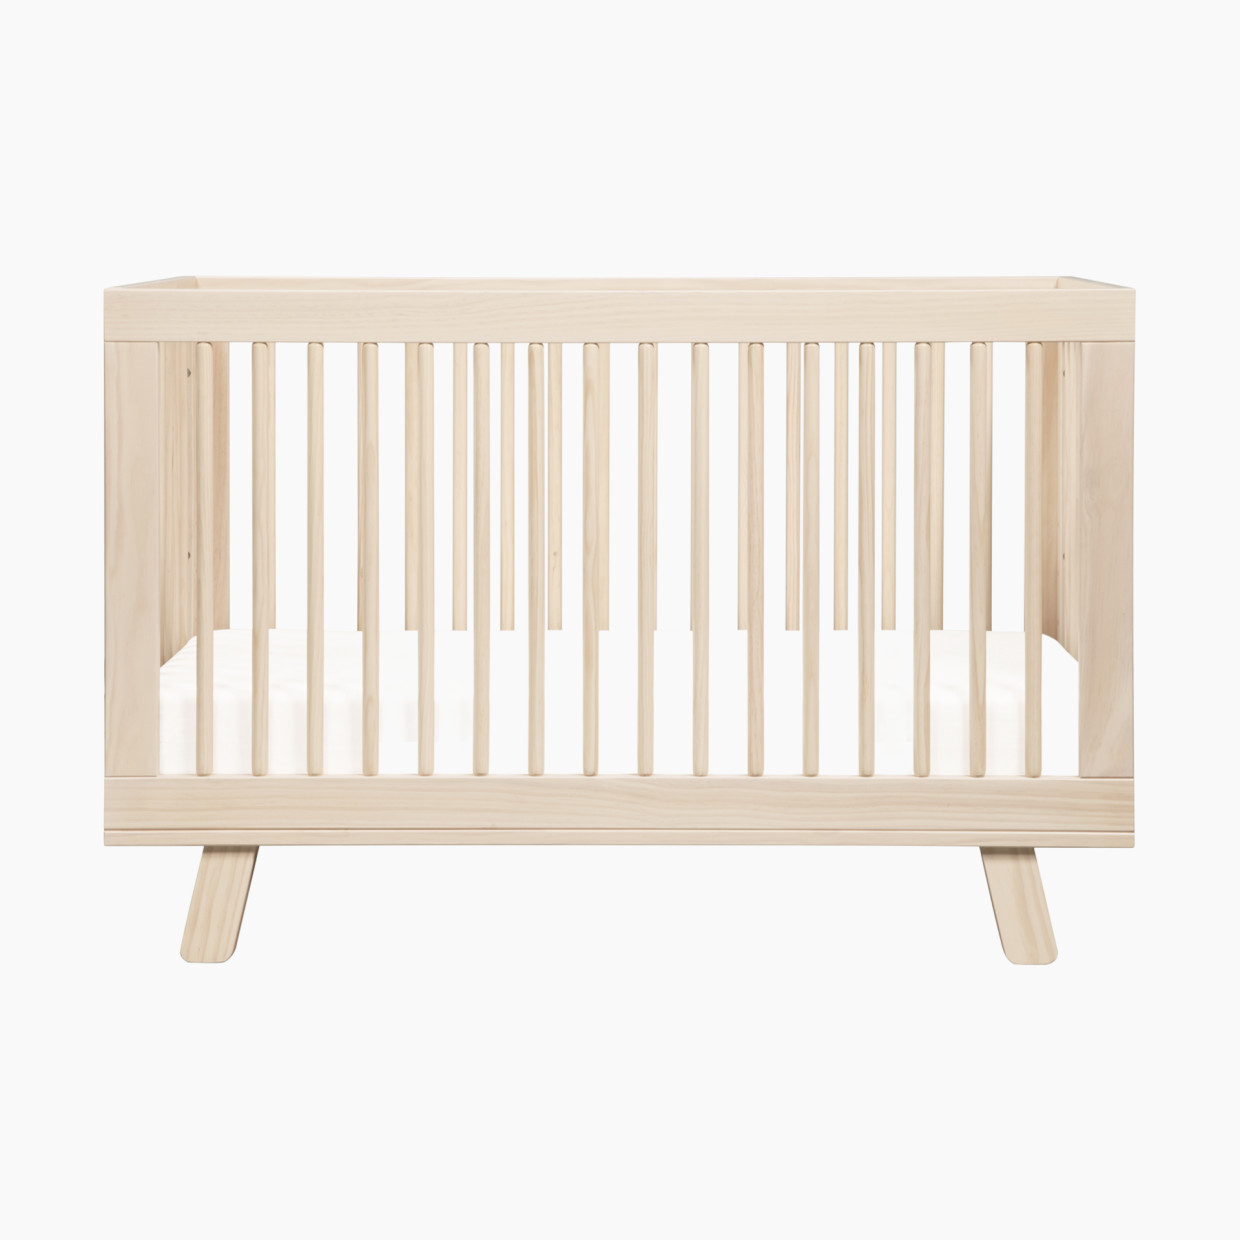 babyletto Hudson 3-in-1 Convertible Crib with Toddler Bed Conversion Kit - Washed Natural.